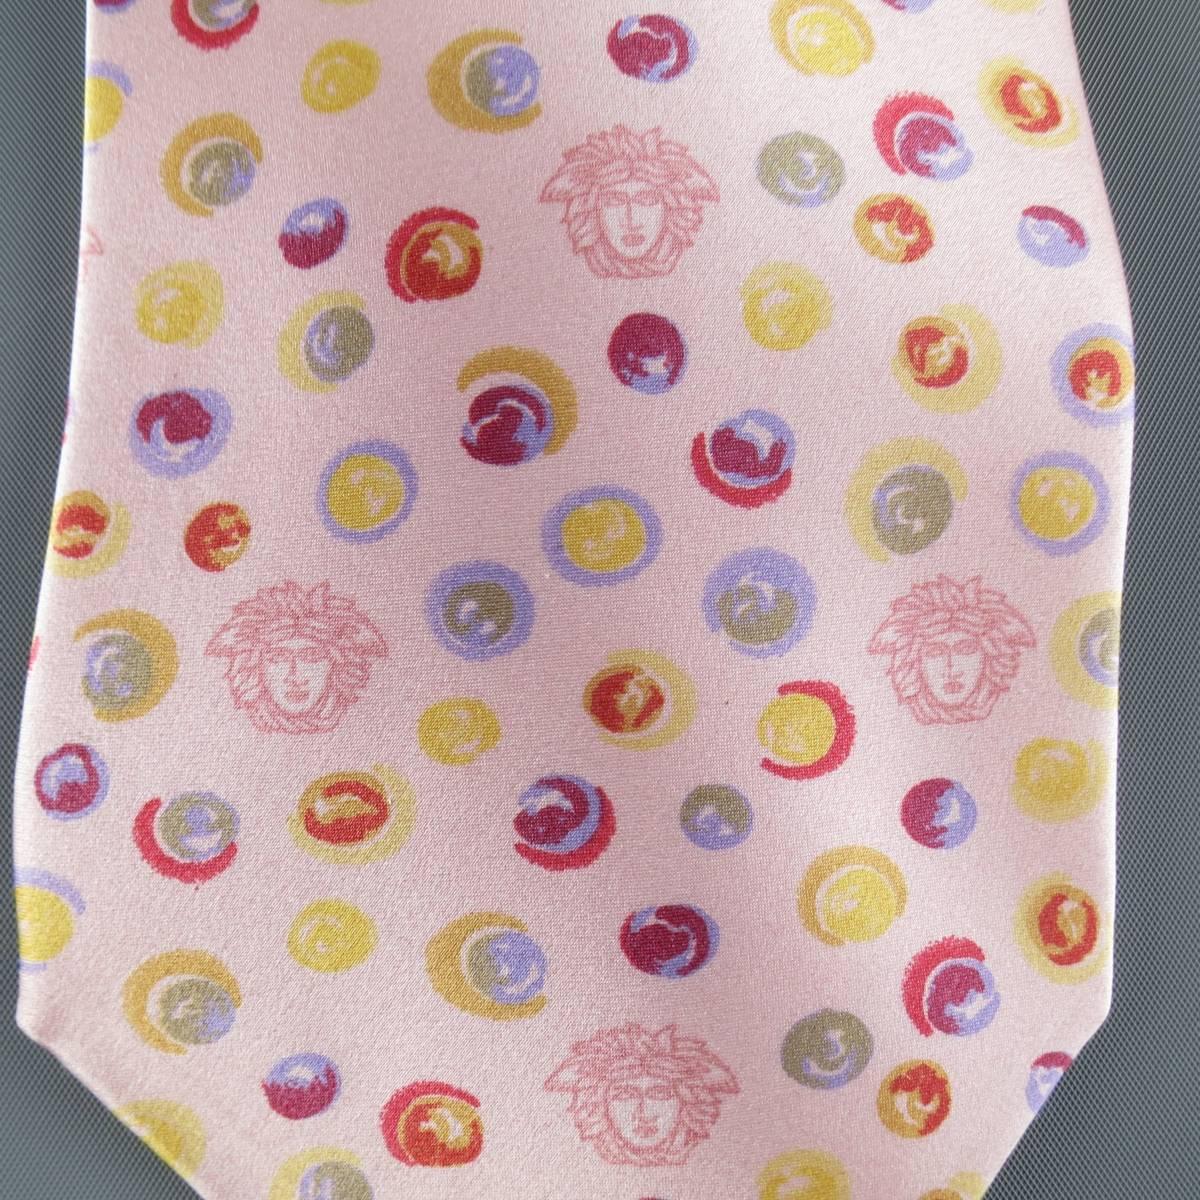 GIANNI VERSACE Vintage Tie consists of 100% silk material in a pink color tone. Designed in a classic style, multi-color polka-dot pattern with signature Medusa print.
Made in Italy.
 
Excellent Pre-Owned Condition
 
Measurements
 
Width: 10